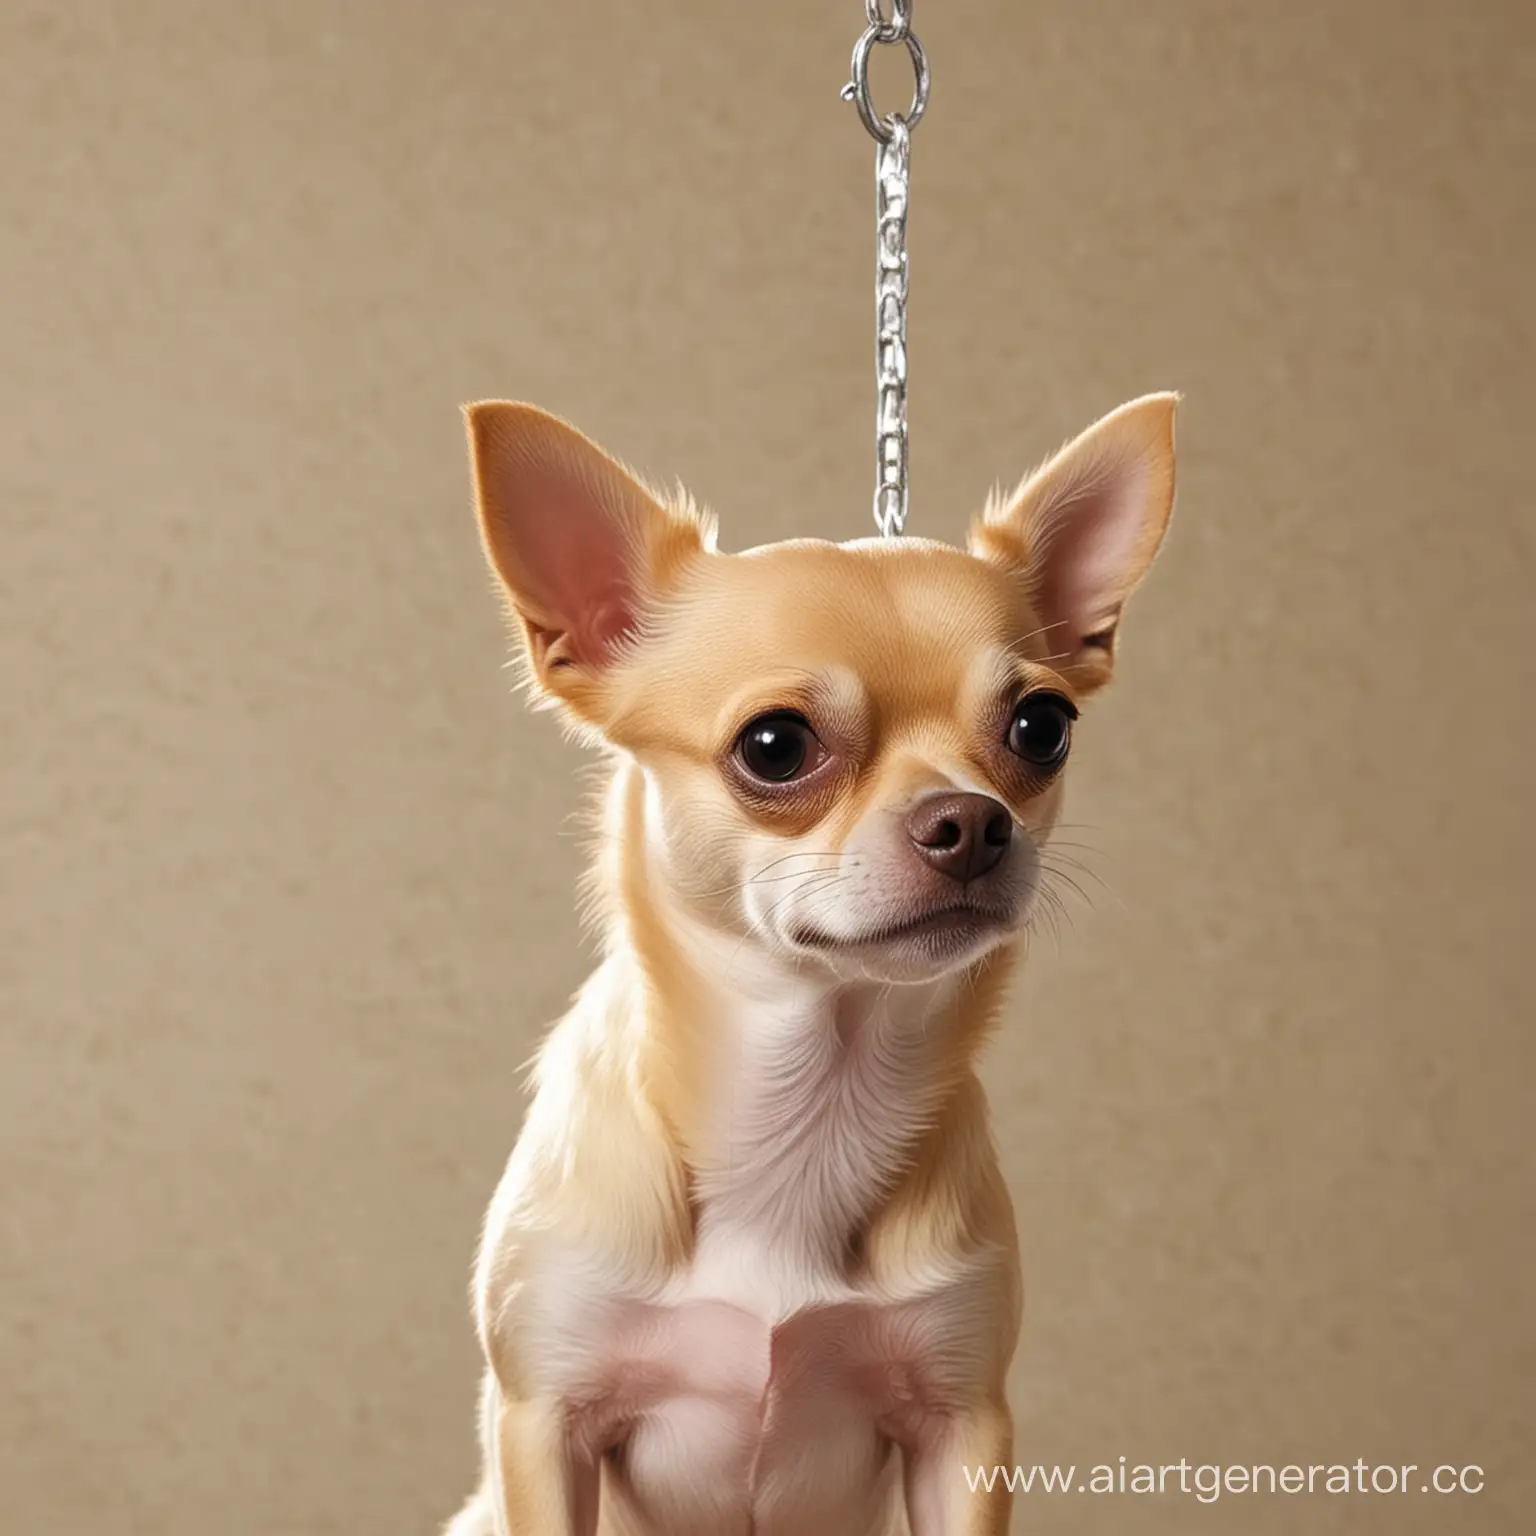 Chihuahua-Hanging-Herself-in-Quirky-Misadventure